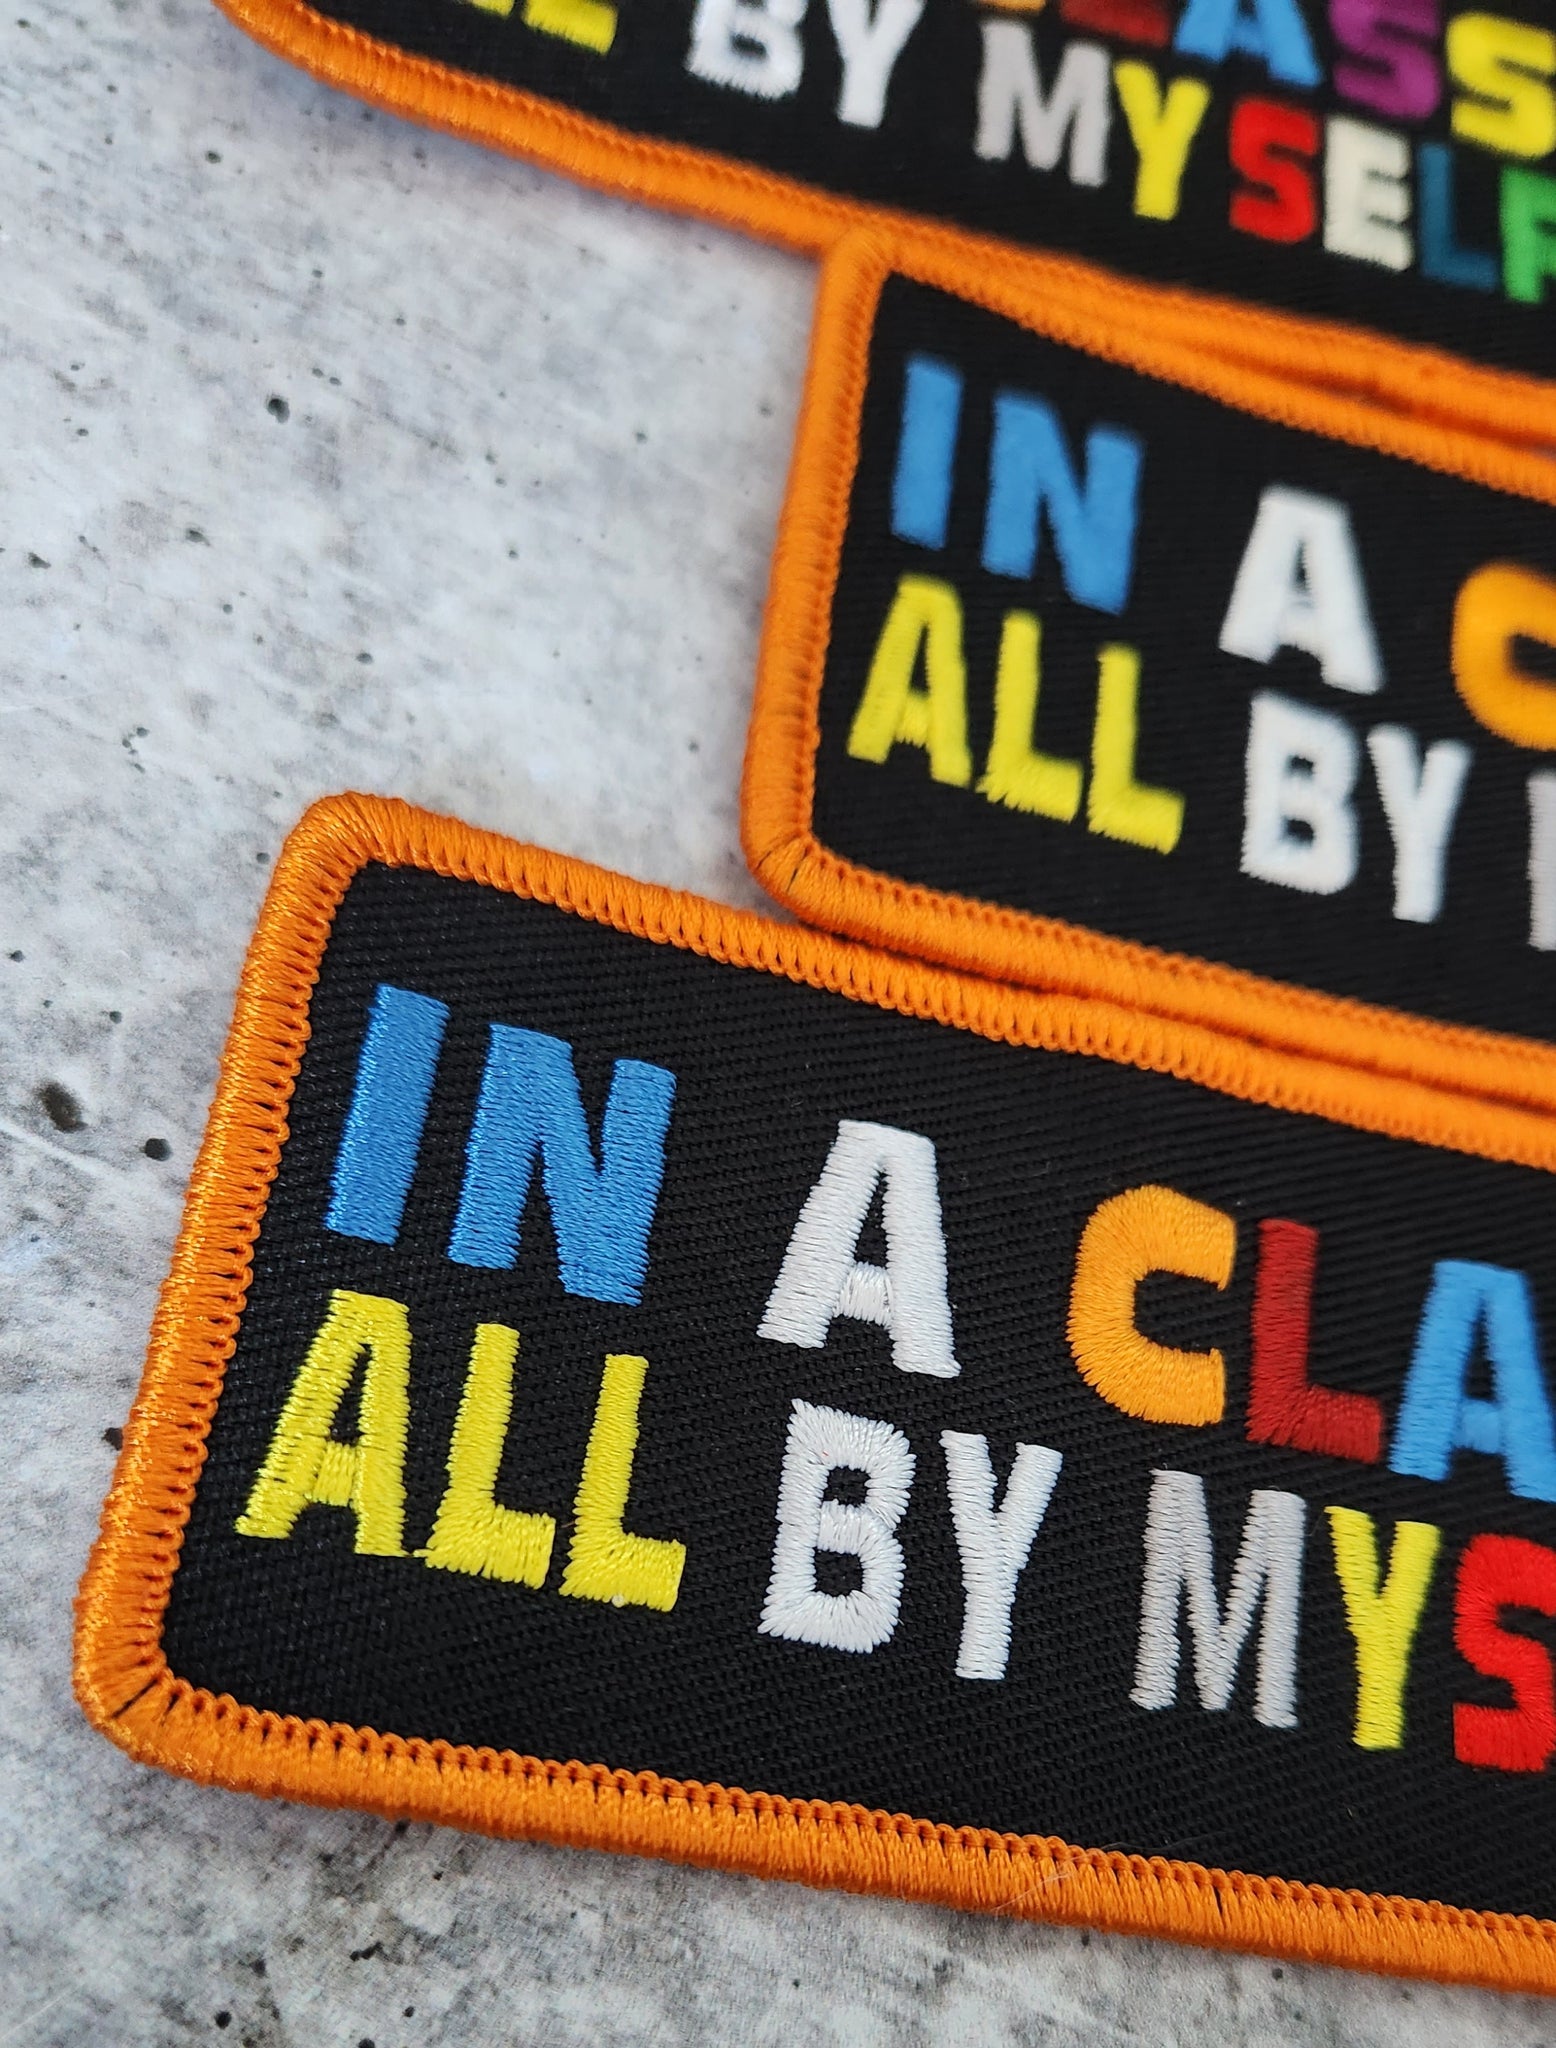 Colorful "In a Class All by Myself" Iron-On Embroidered Patch - 4" x 2" Size: Embrace Individuality with Vibrant Confidence